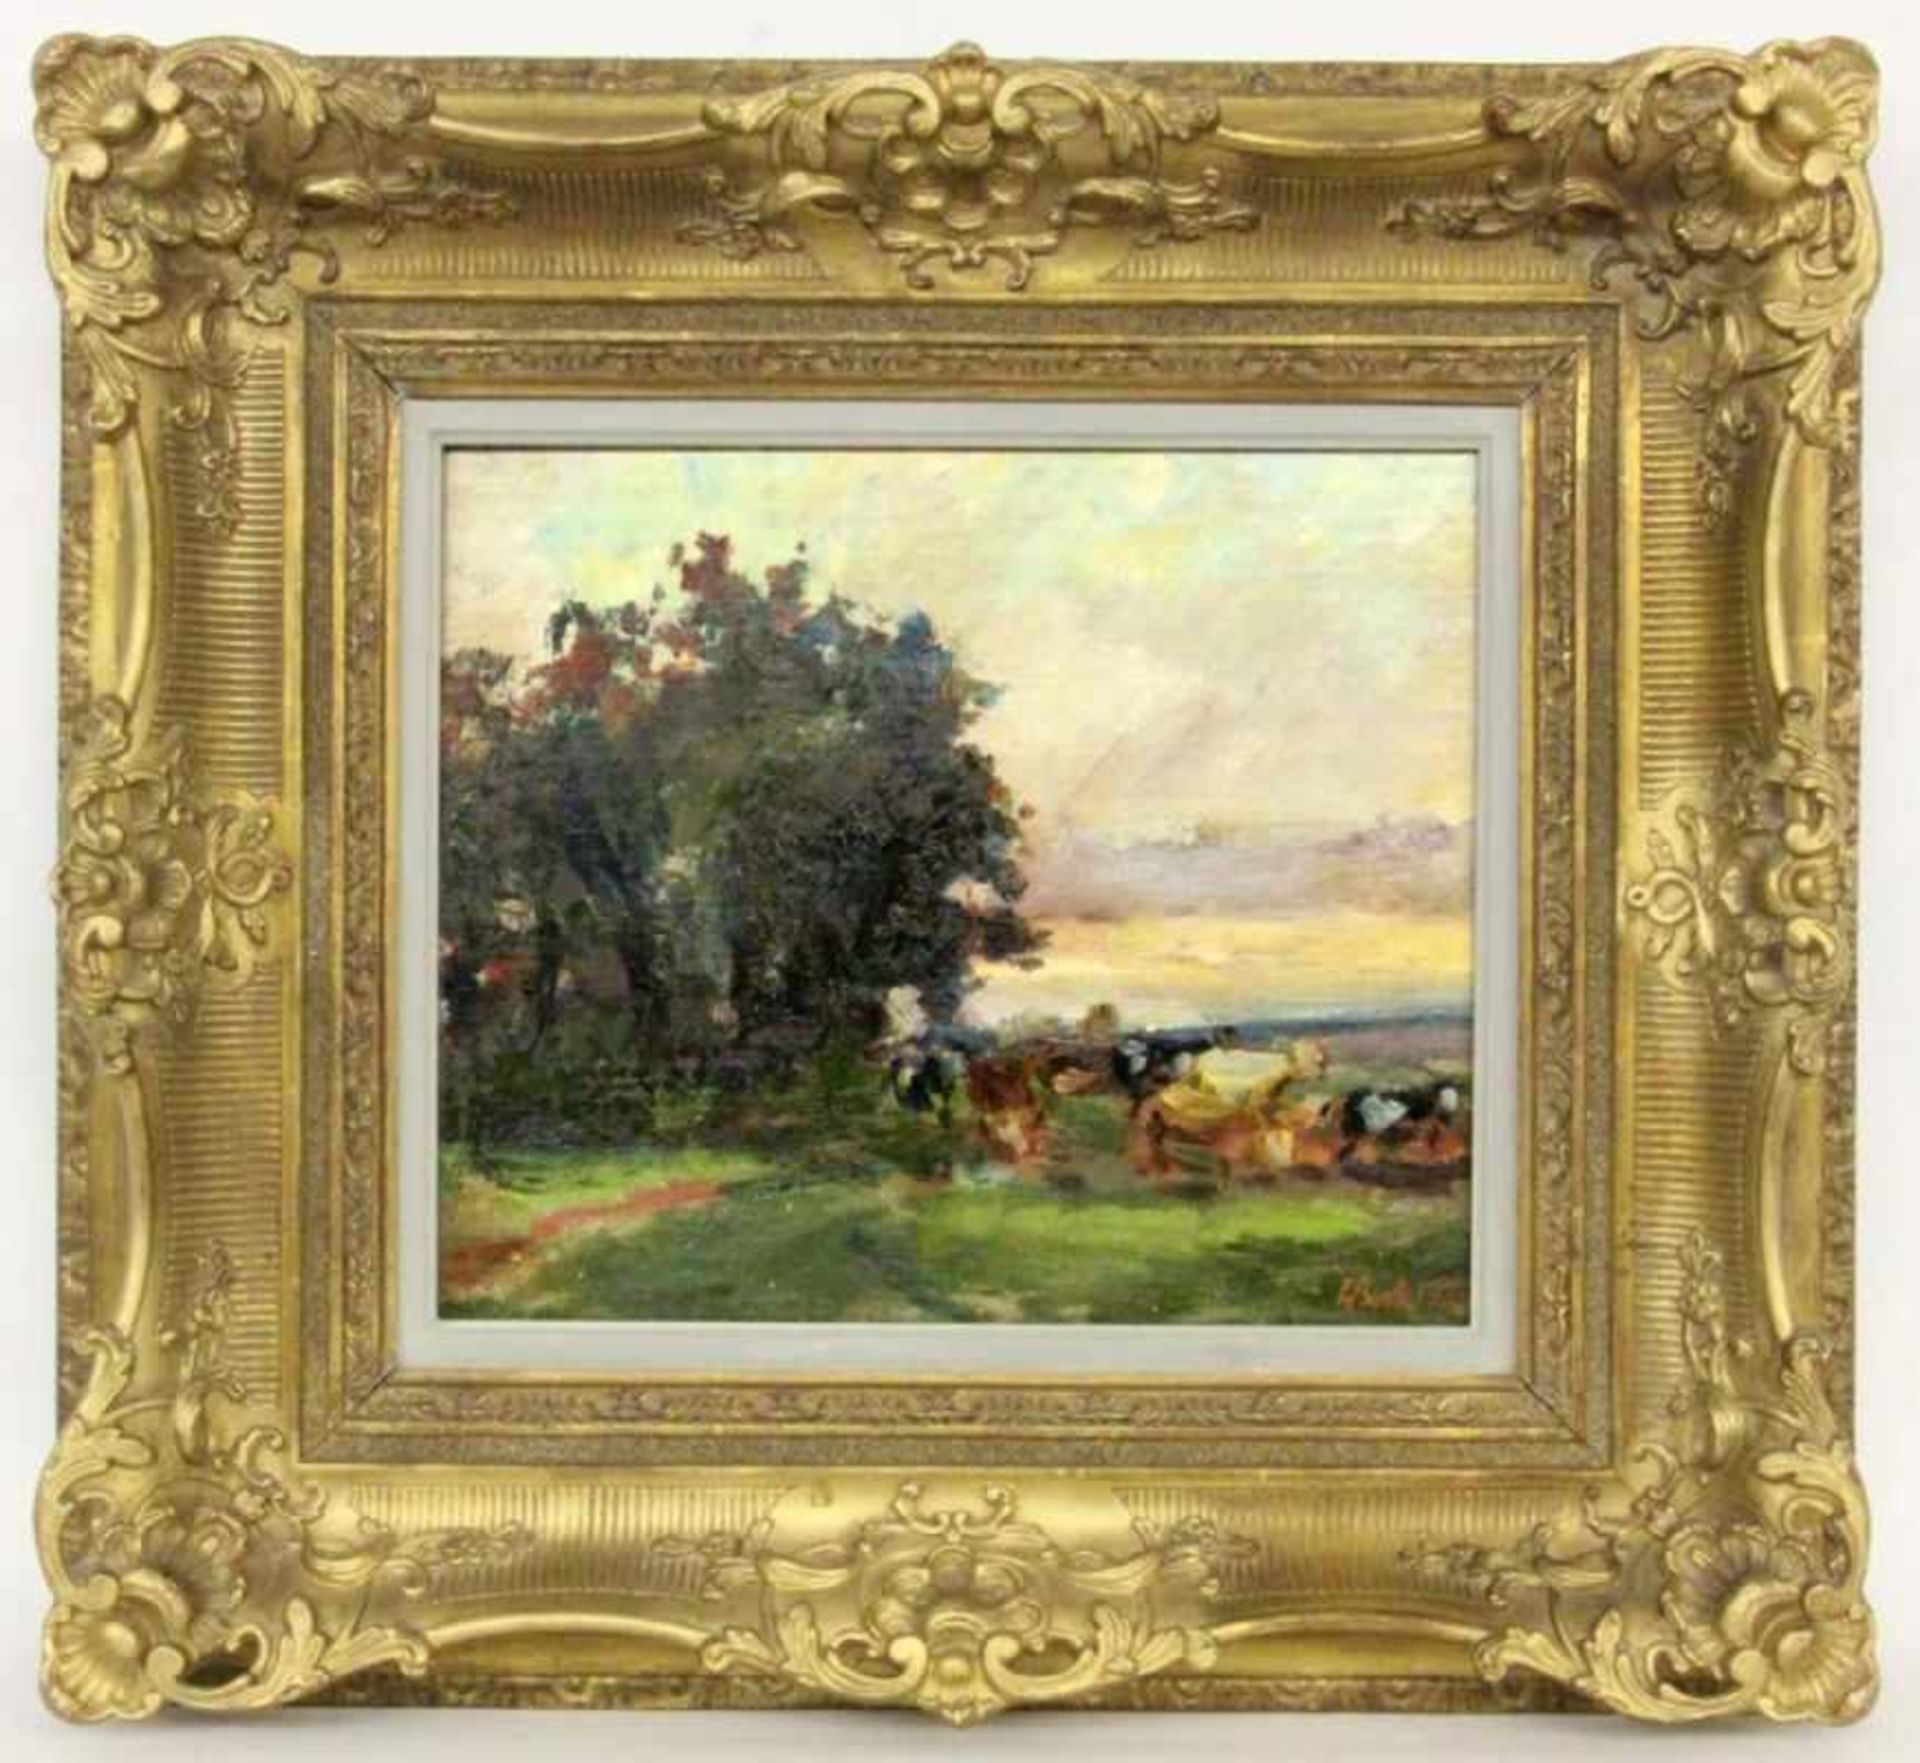 BOCK, LUDWIGMunchen 1886 - 1971 Haimhausen Evening mood at Chiemsee. Oil on panel,signed and